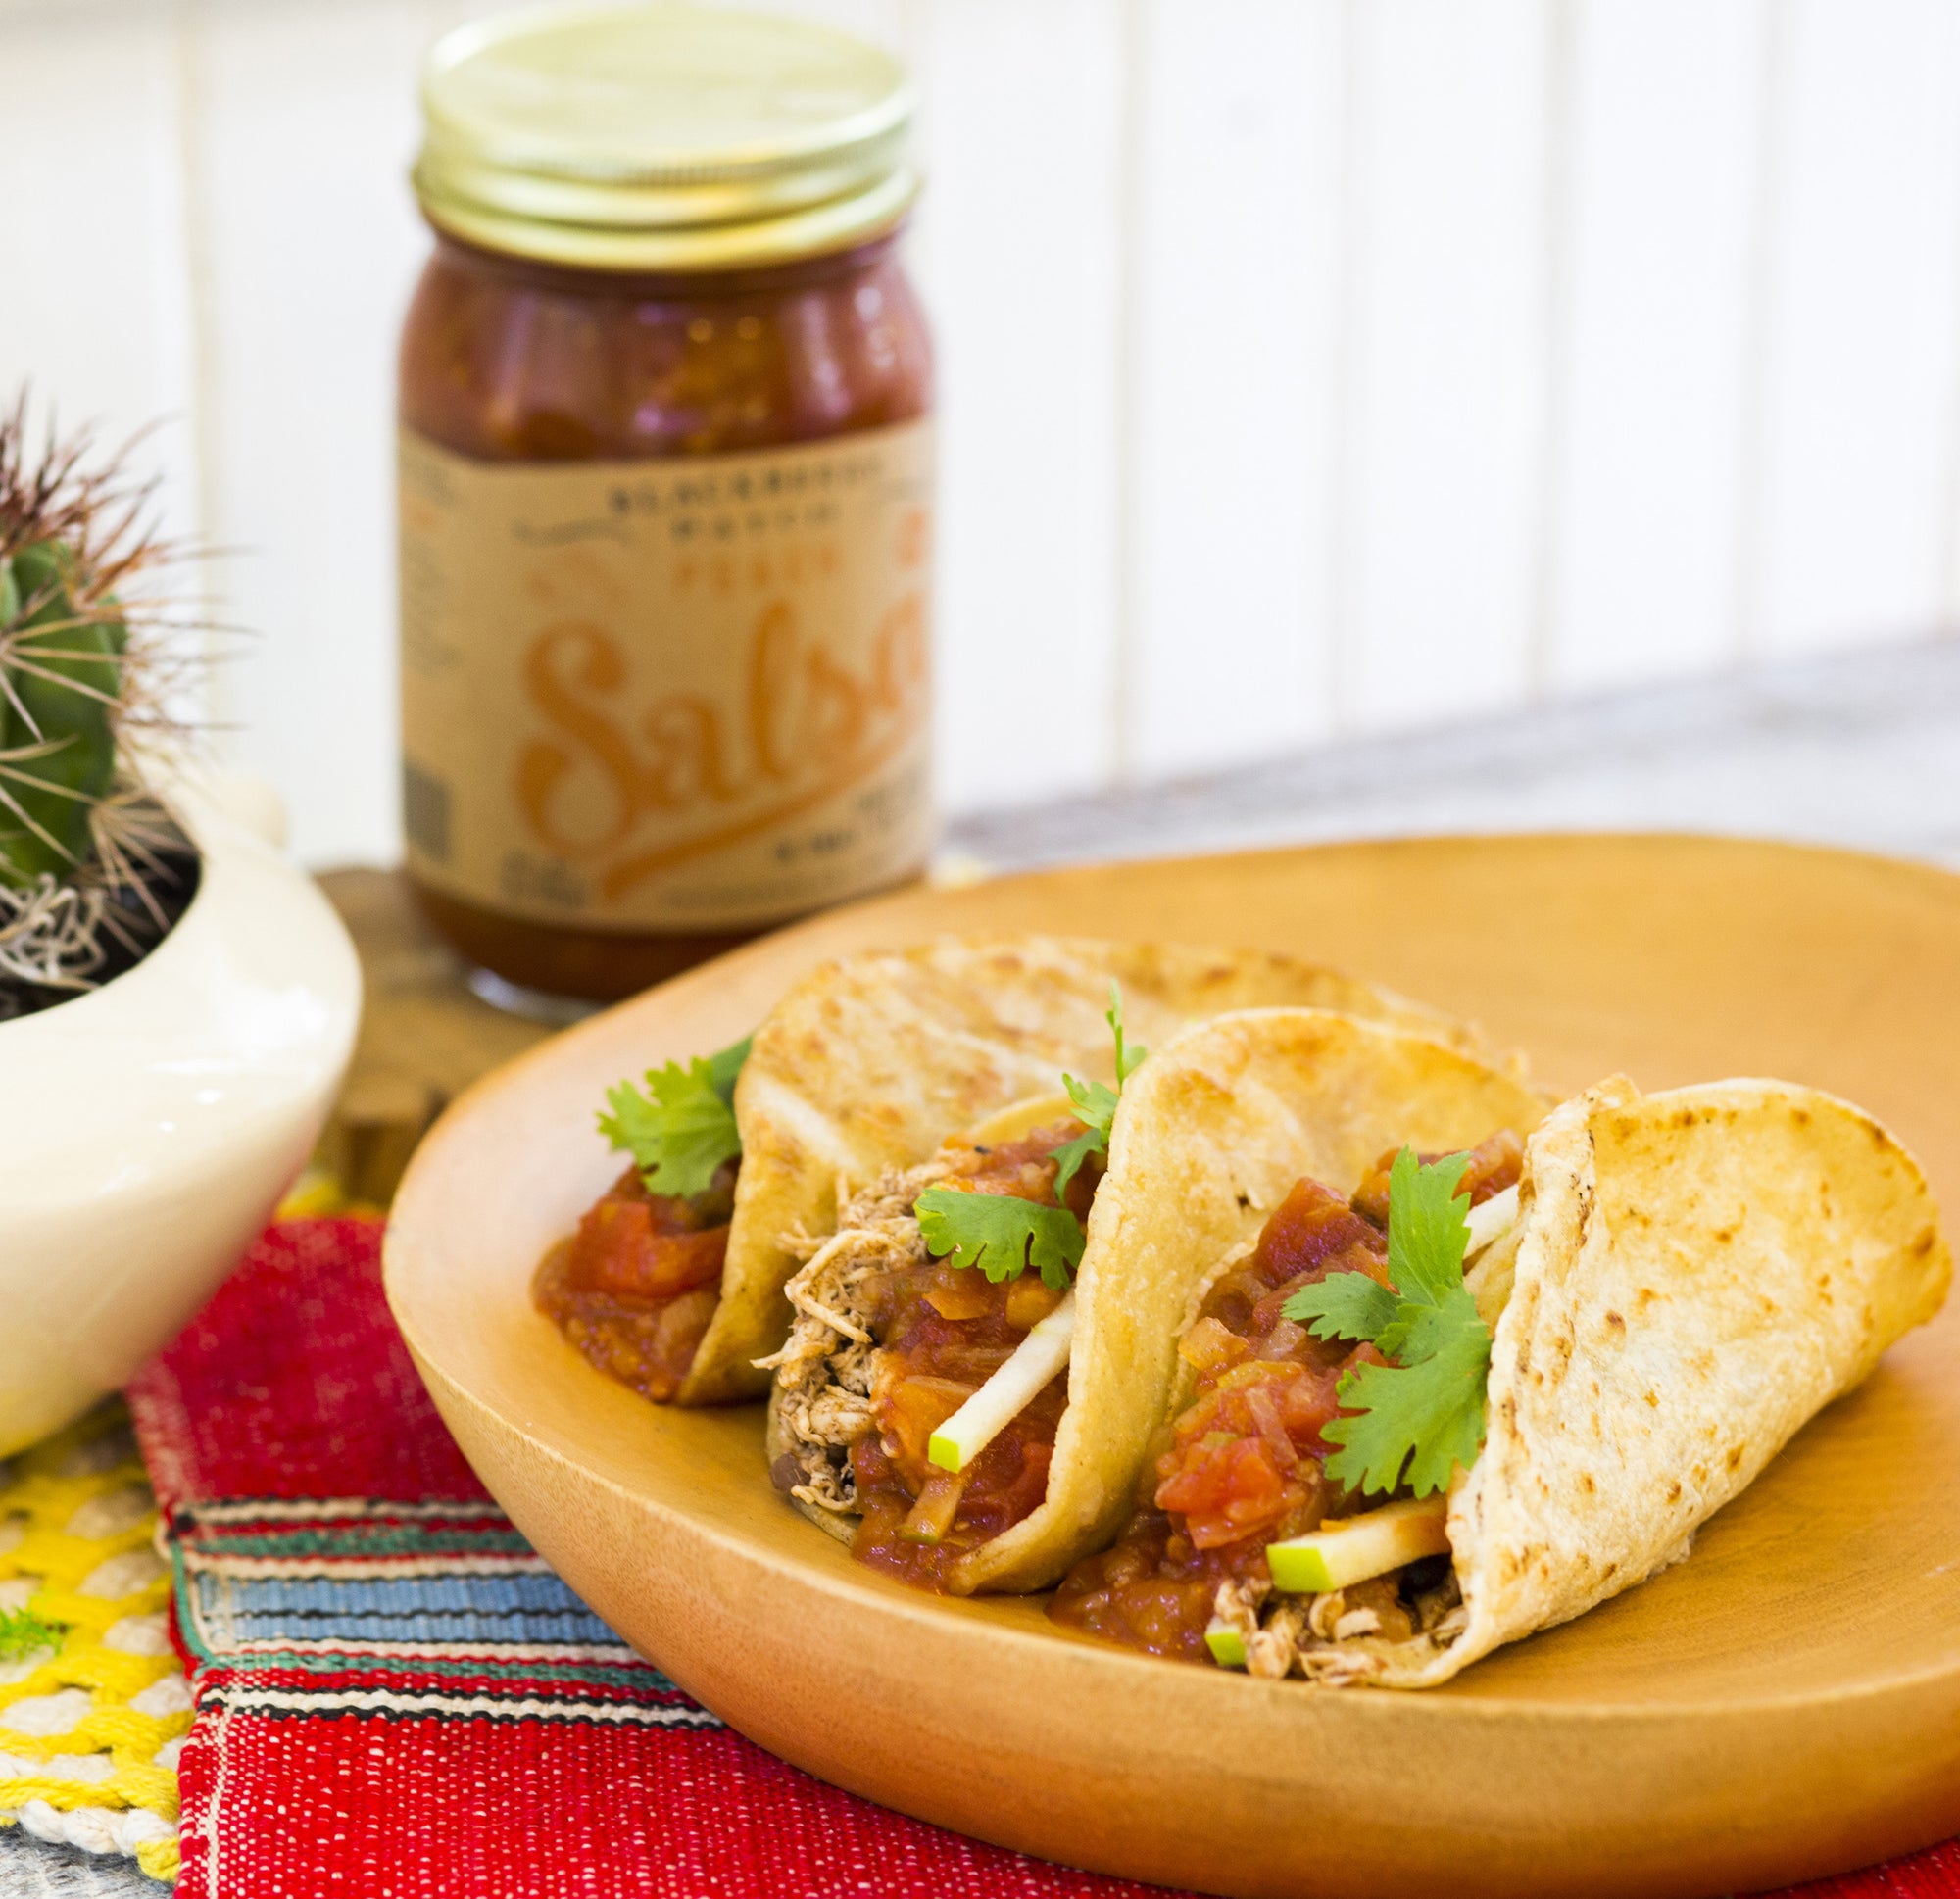 Recipe Photo of Pulled Pork Tacos with Peach Salsa